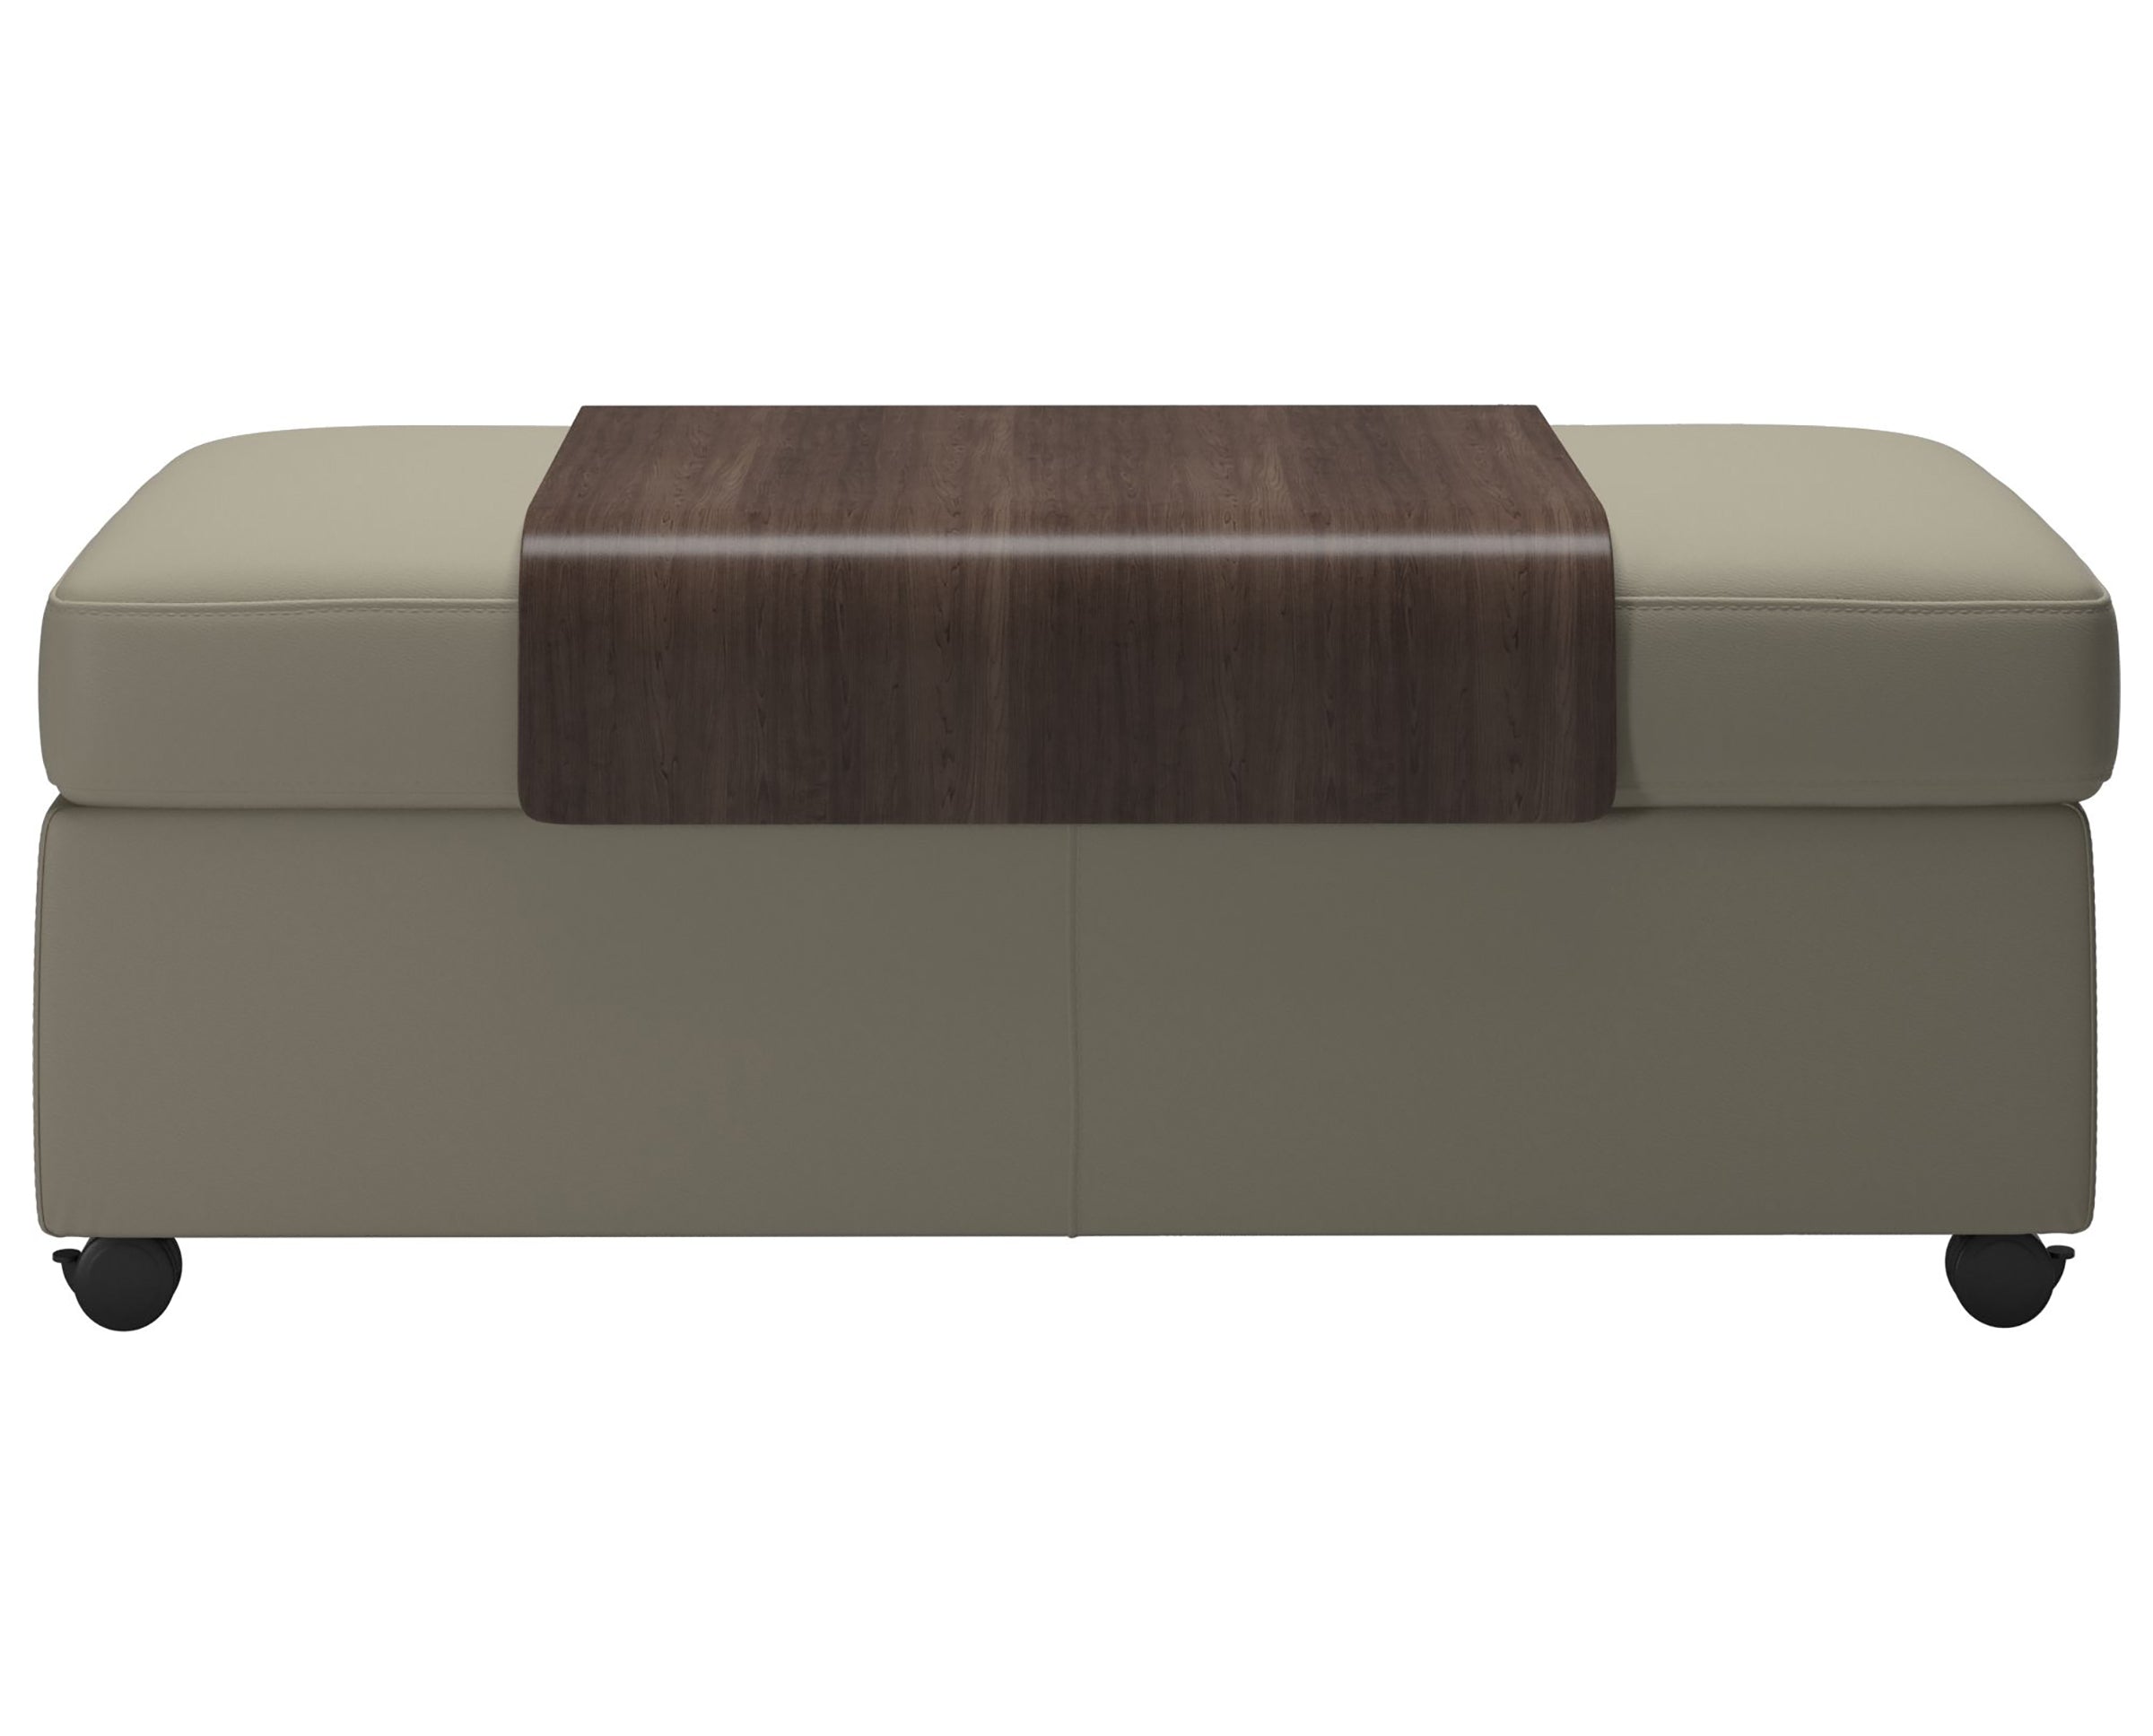 Paloma Leather Light Grey and Wenge Finish | Stressless Double Ottoman with Table | Valley Ridge Furniture